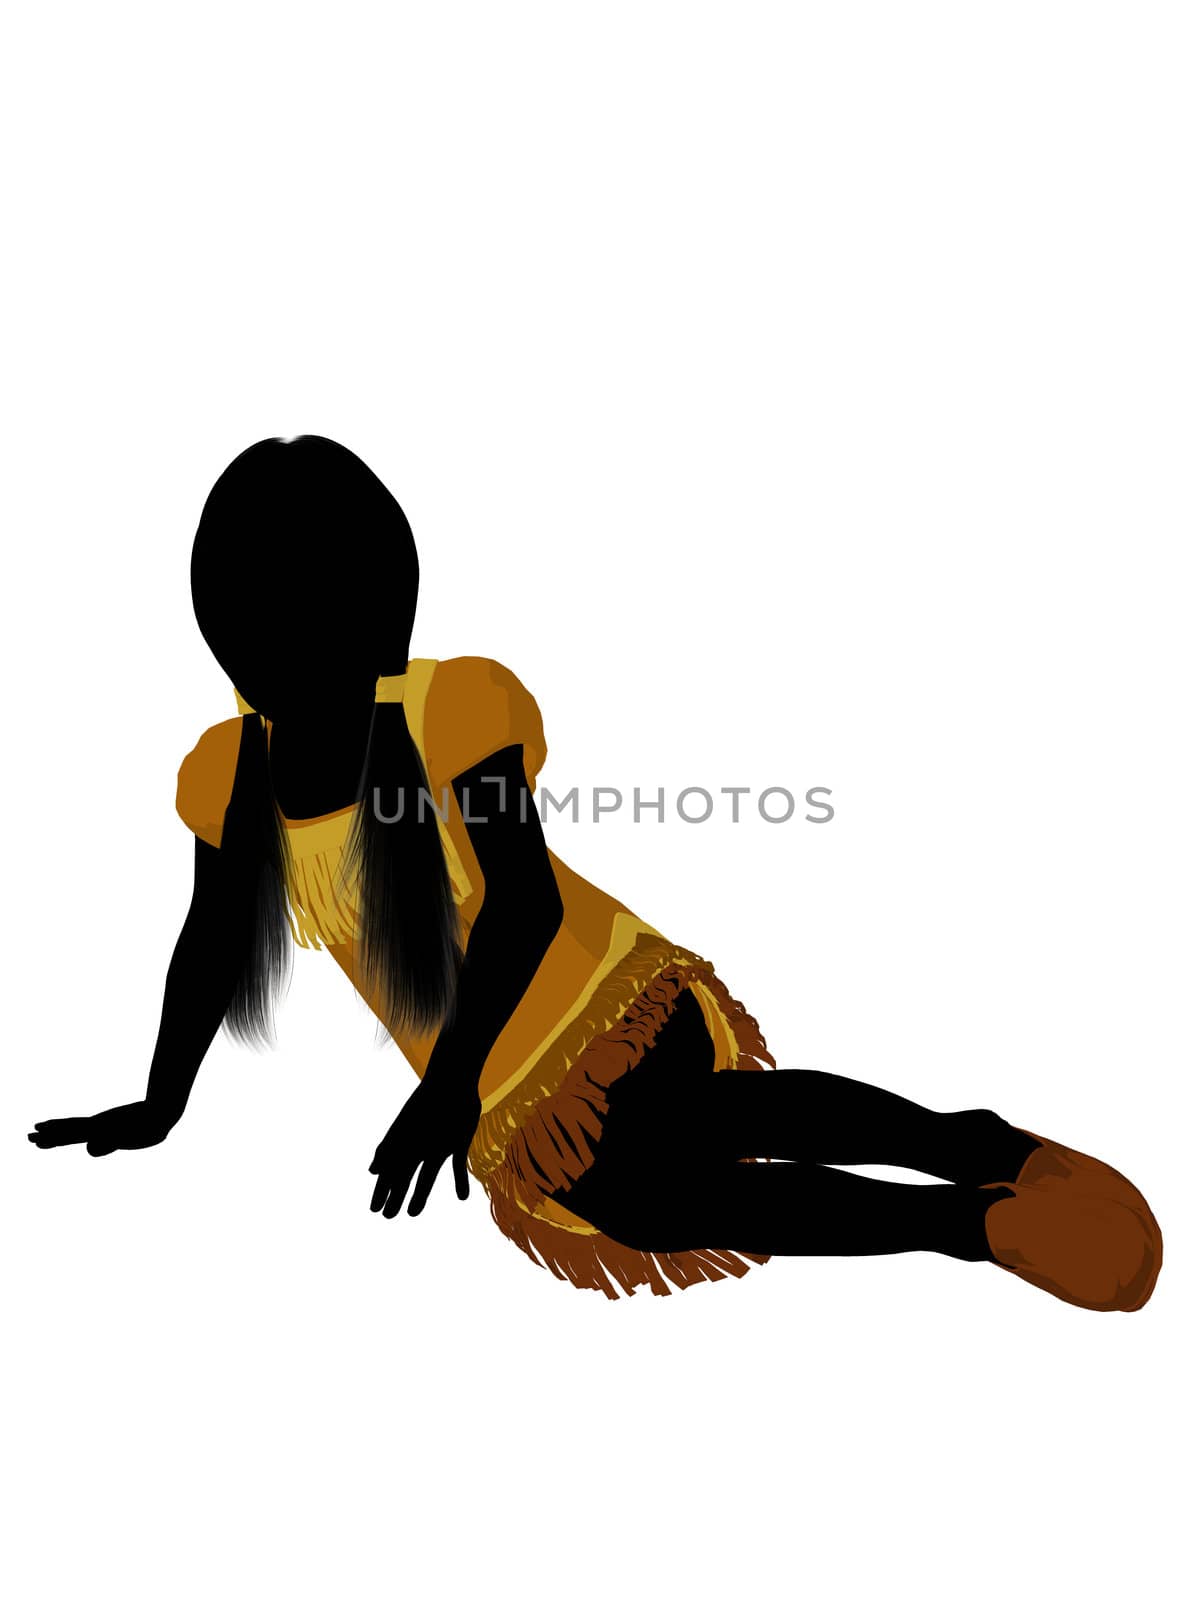 Native American Indian silhouette illustration on a white background